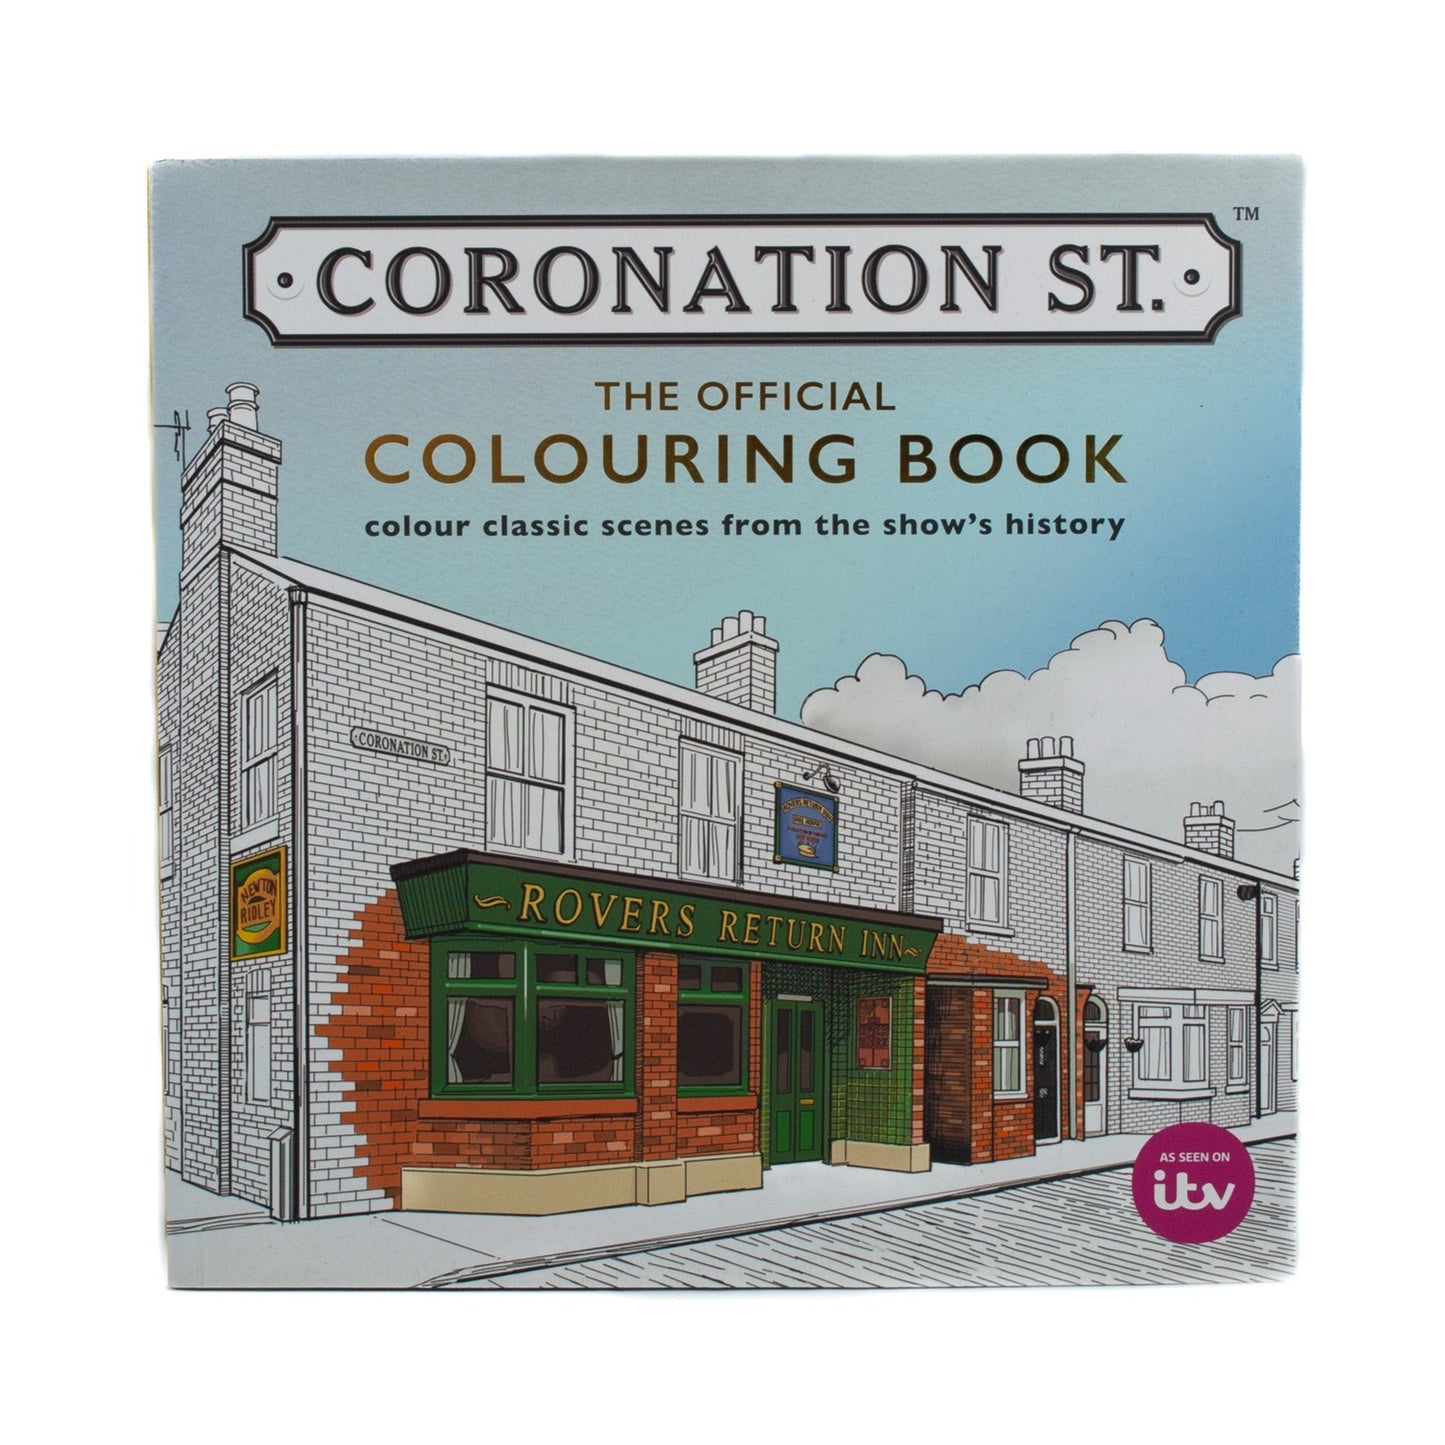 Coronation Street: The Official Colouring Book